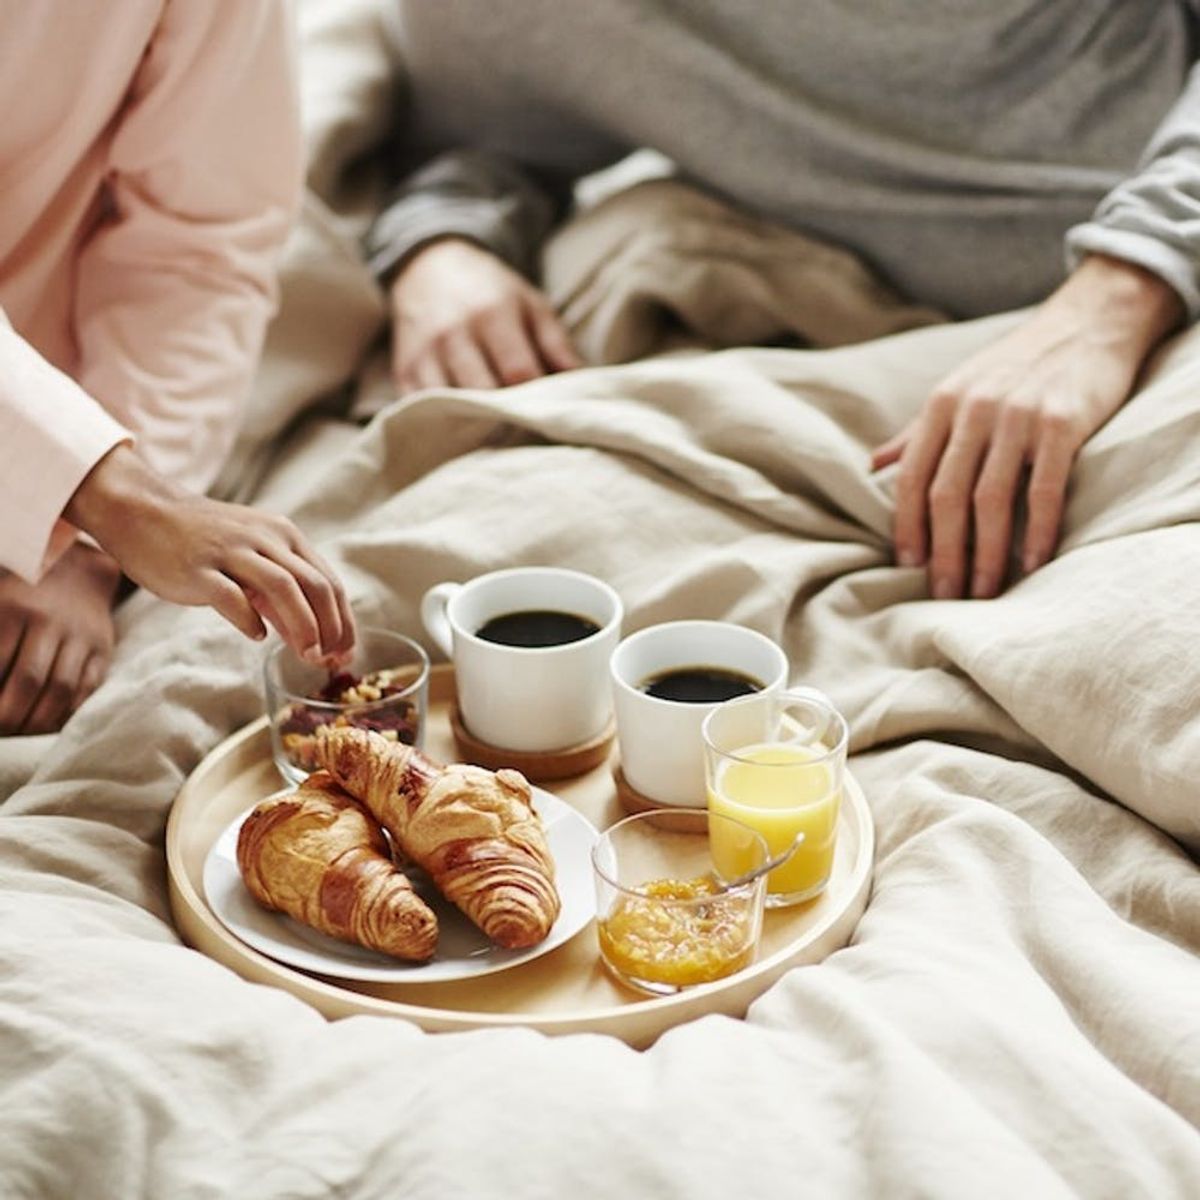 IKEA Now Wants to Serve You Breakfast in Bed